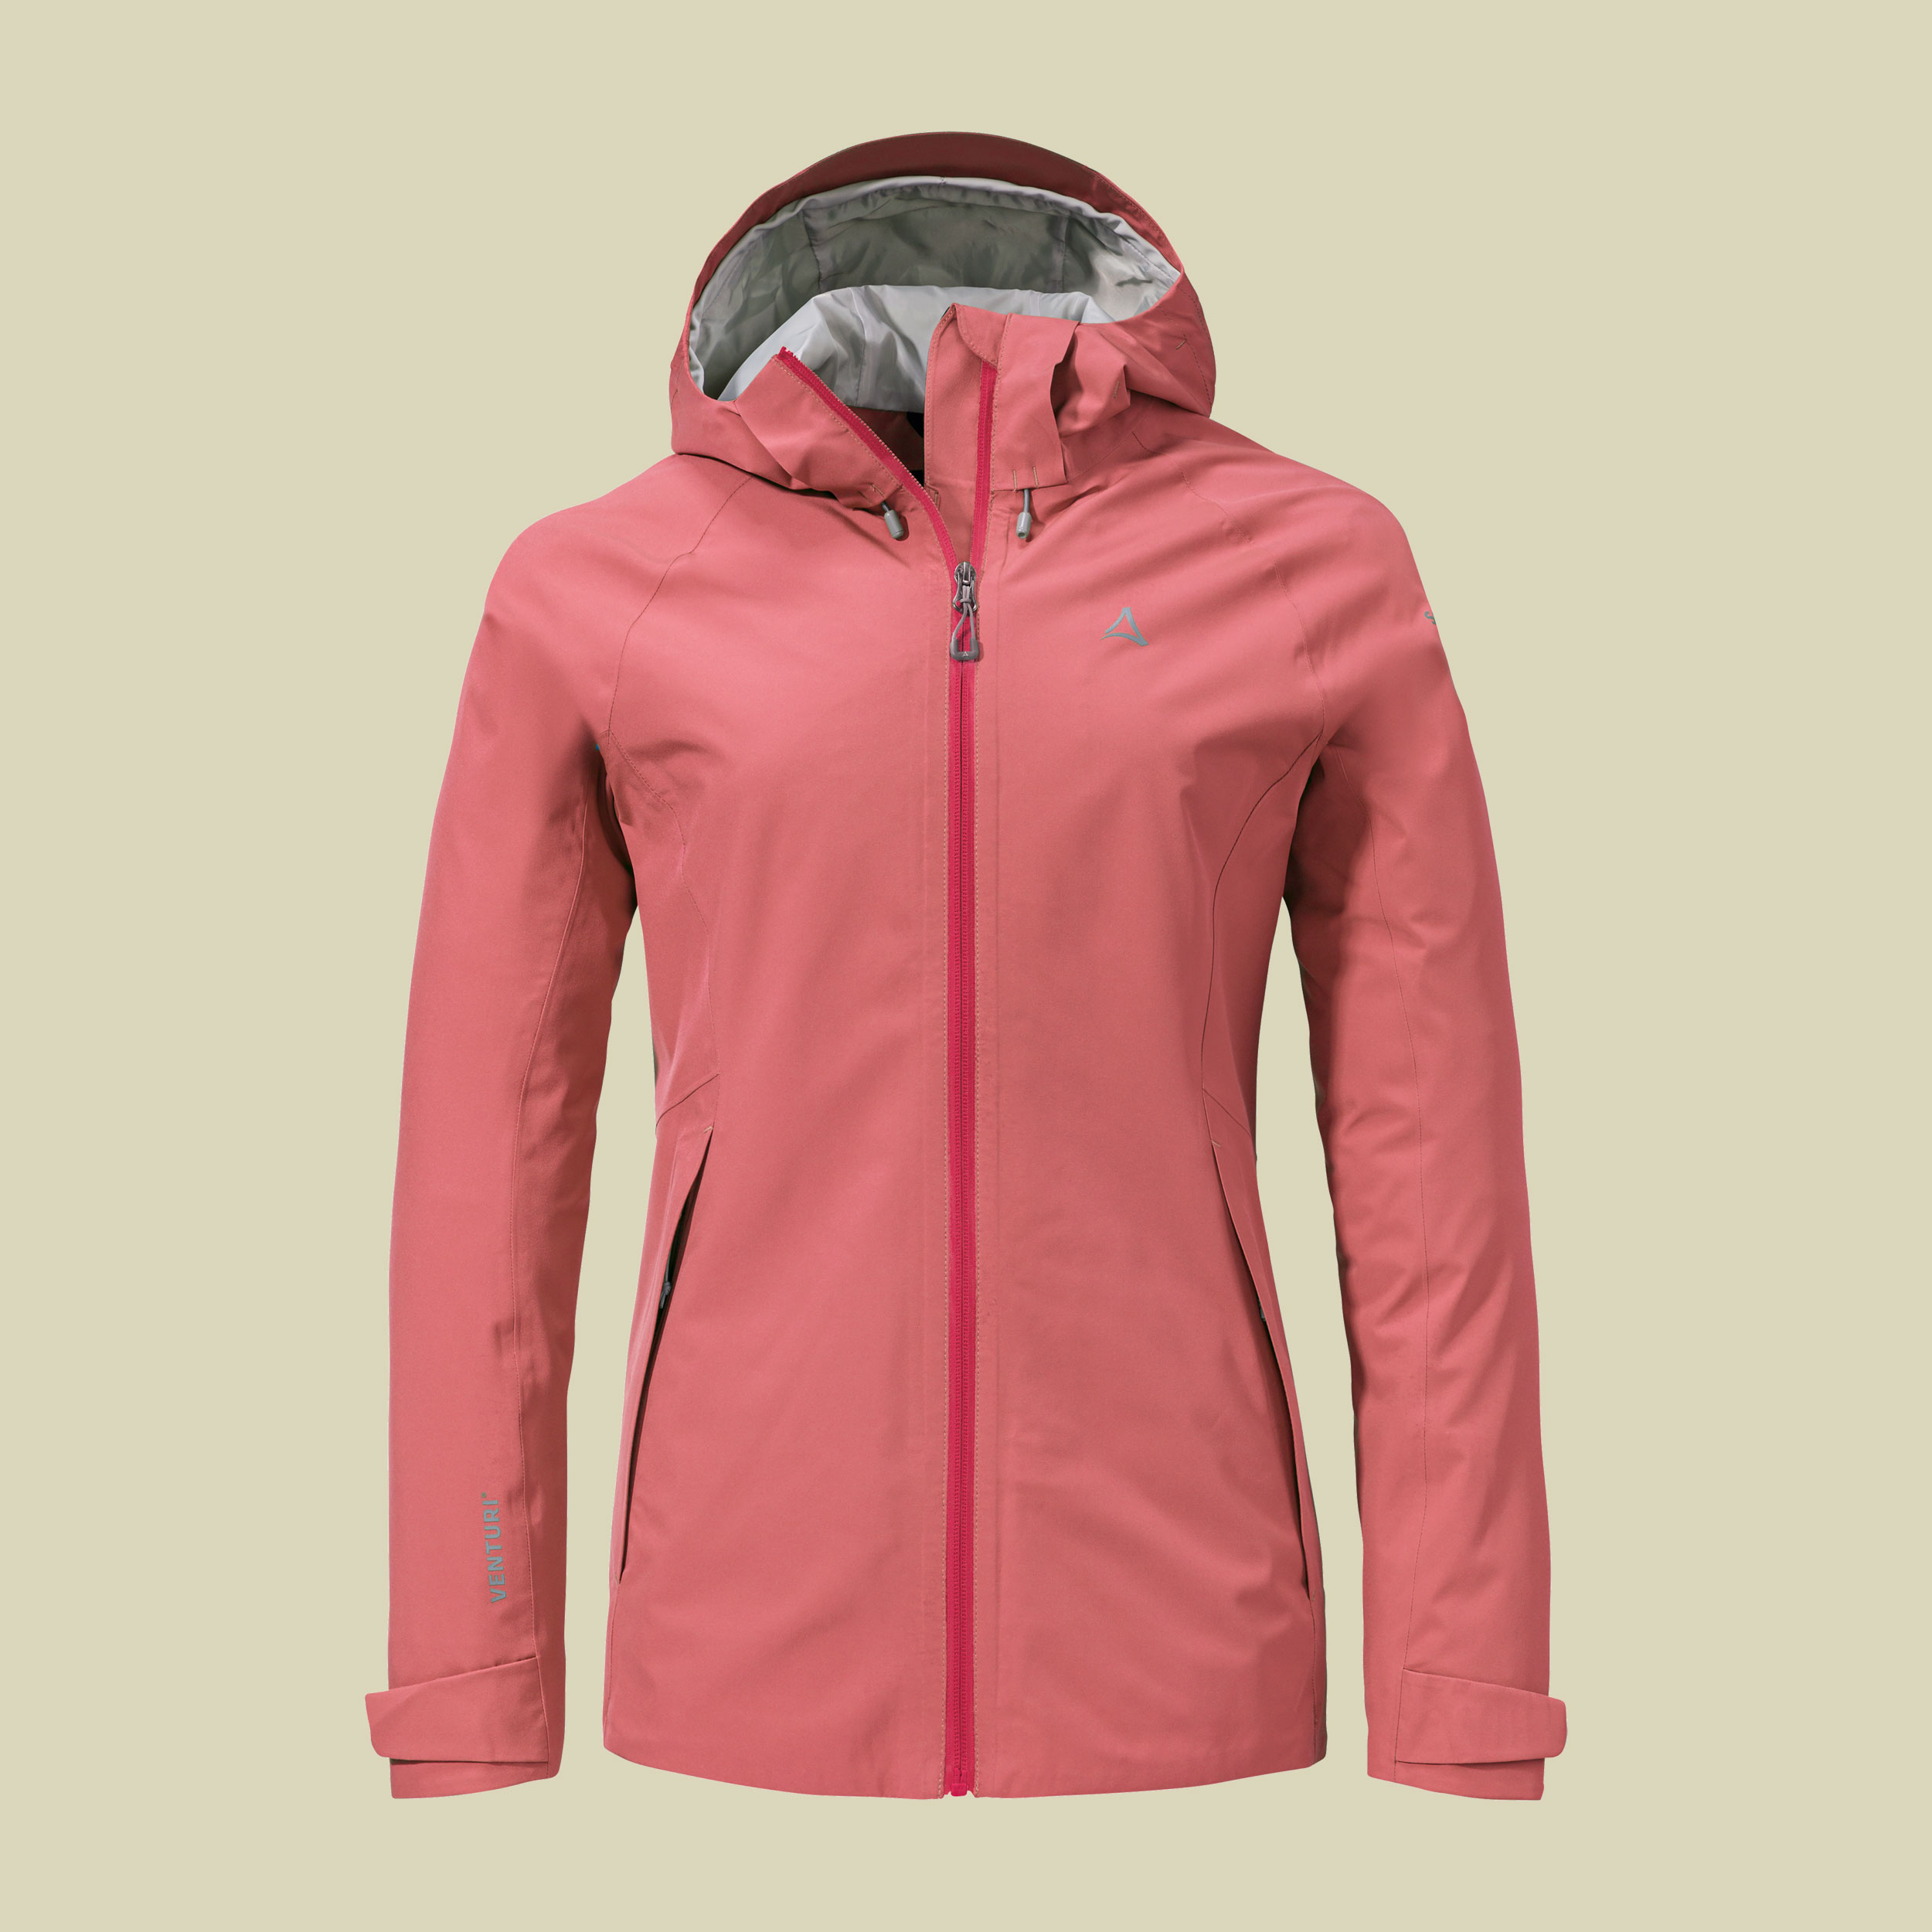 2L Jacket Ankelspitz L Women 36 pink - clasping rose